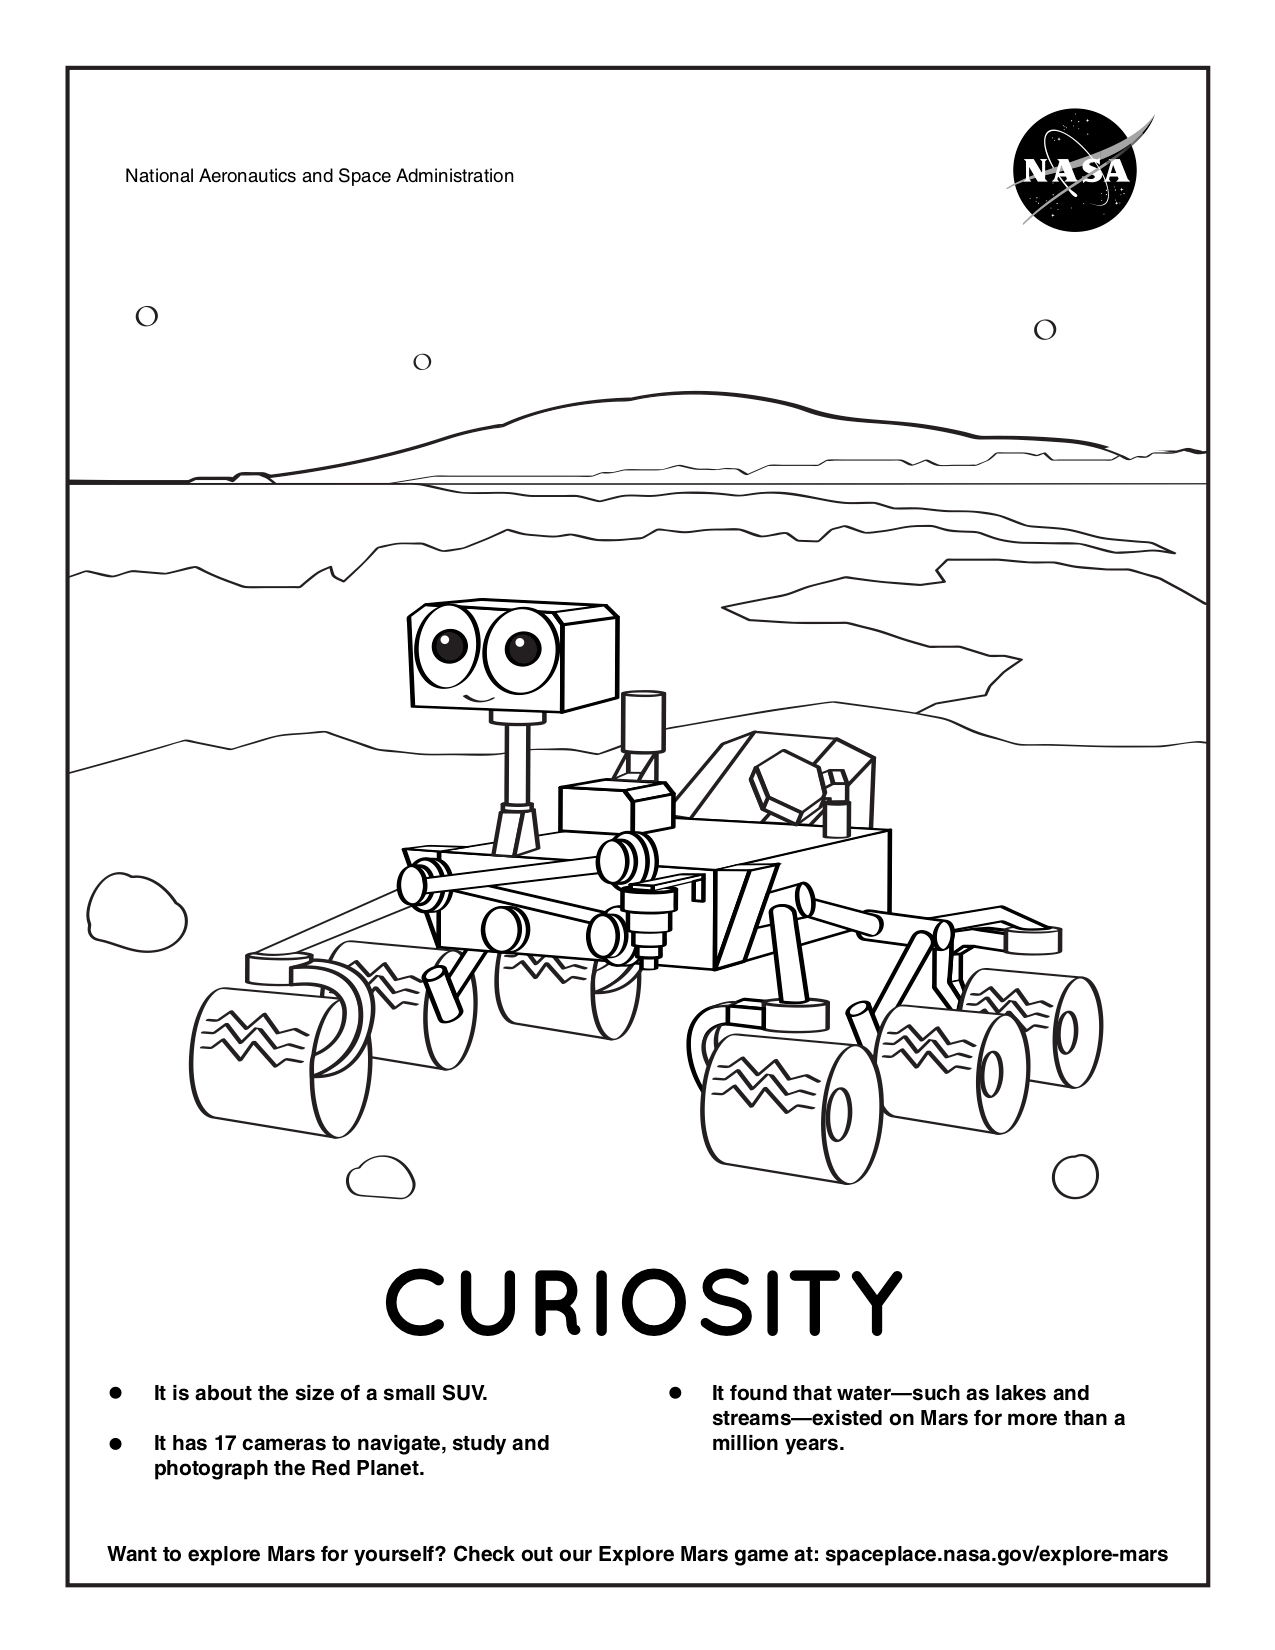 Coloring page for Curiosity.